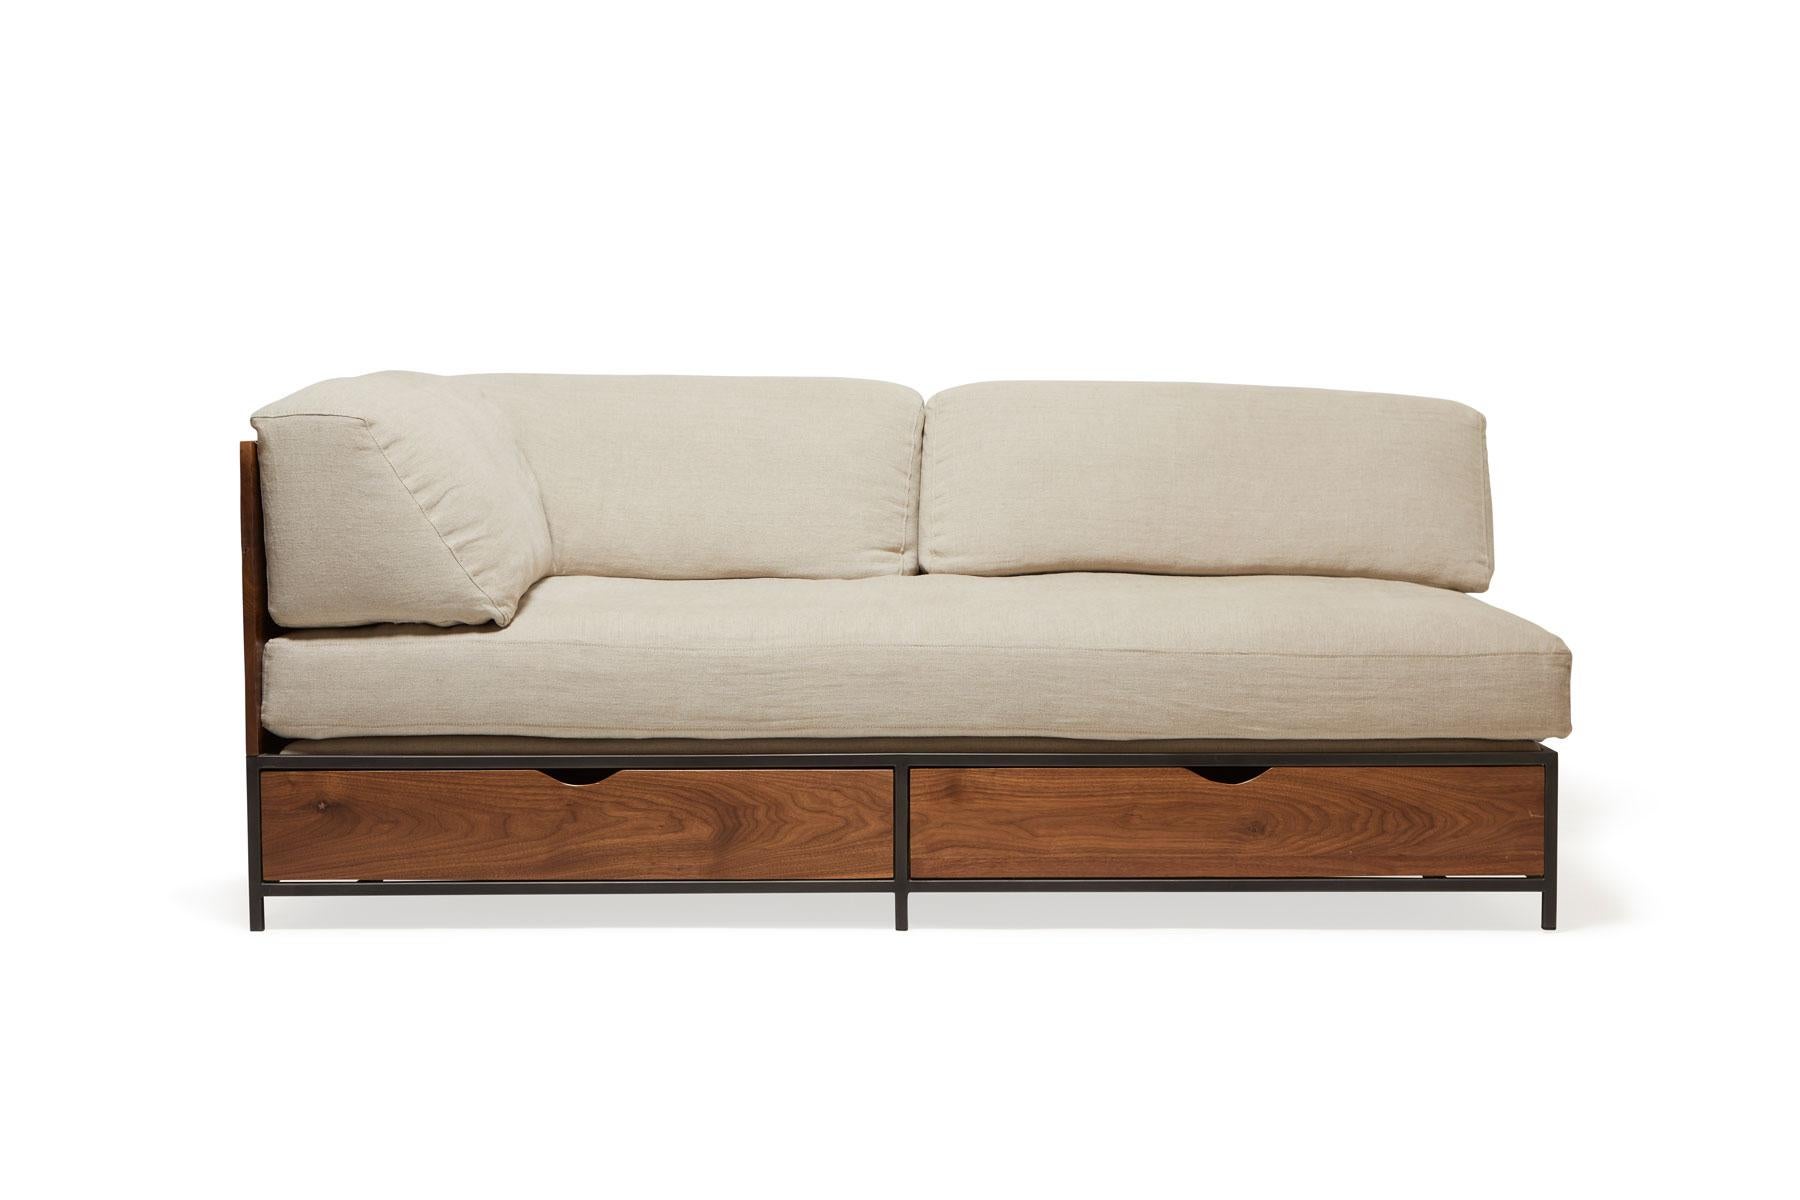 This deep and lounge sofa is comprised of two pieces that can easily be converted to two single beds, or a split king bed. When in the guest bed configuration, each bed is the size of a twin mattress and fits twin sheets. When pushed together it